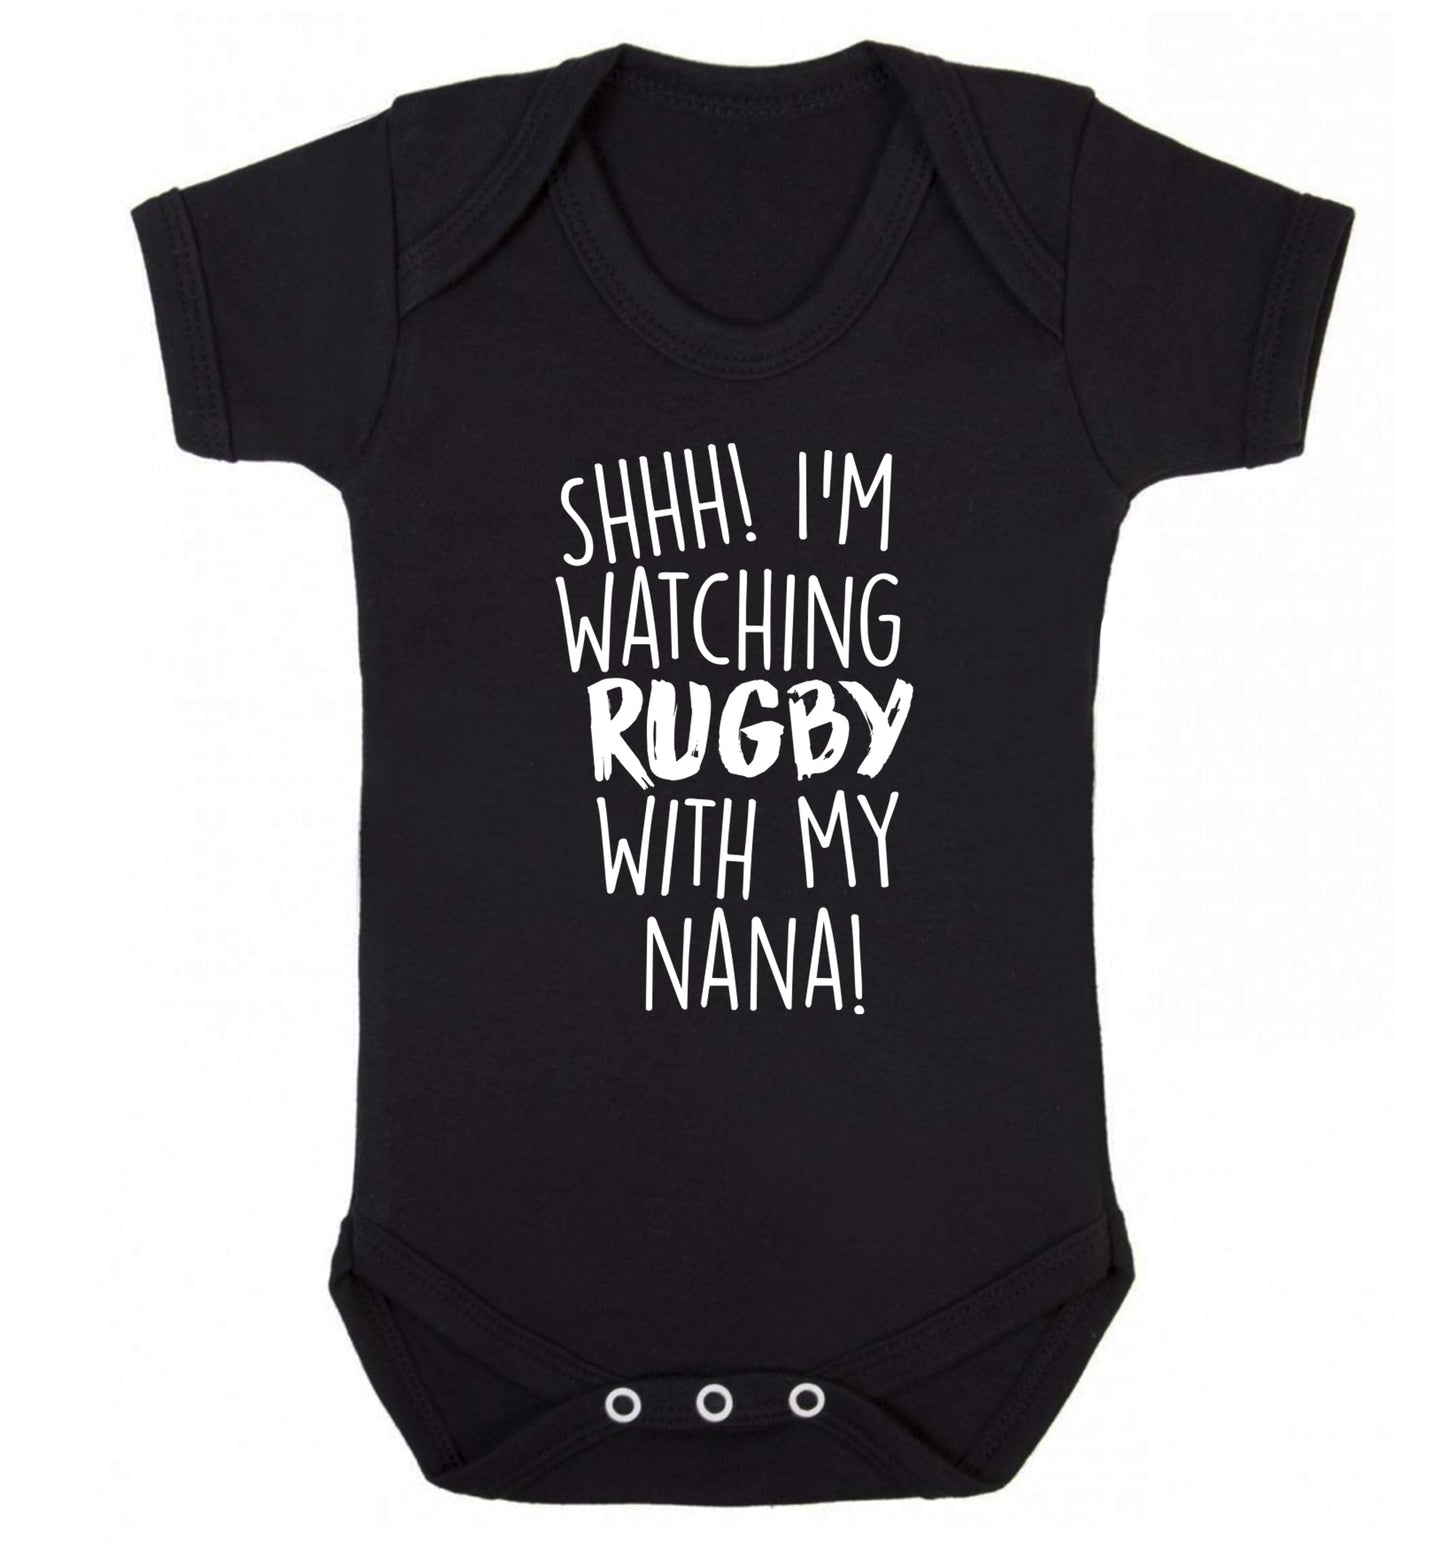 Shh I'm watching rugby with my nana Baby Vest black 18-24 months